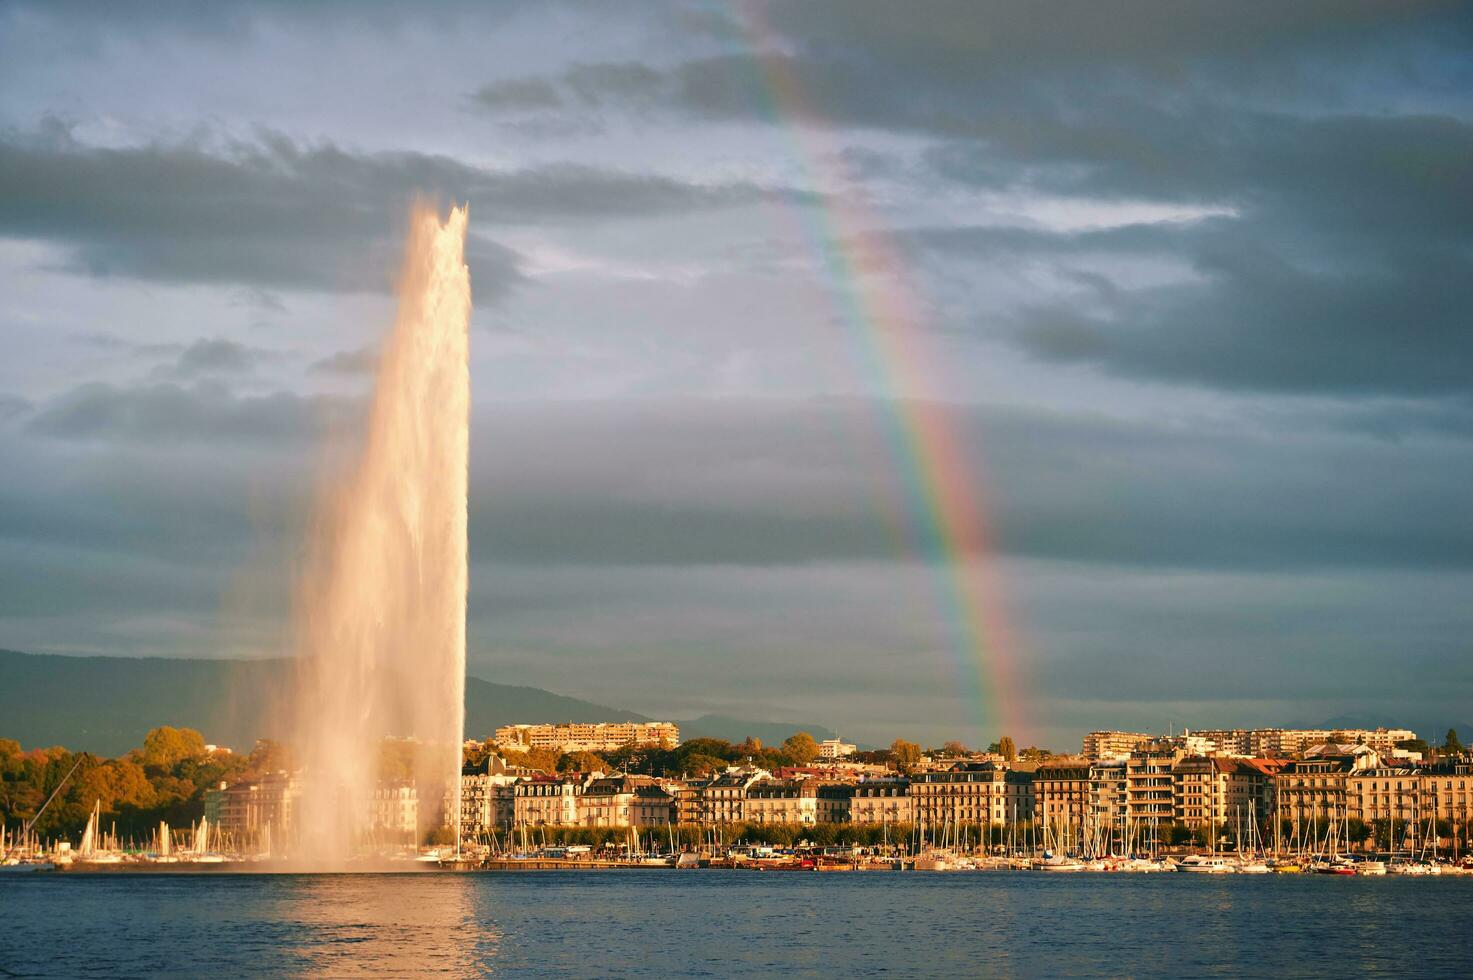 City landscape of Geneva downtown and lake, Switzerland, bright rainbow over famous 140 meters Jet d'eau fountain photo